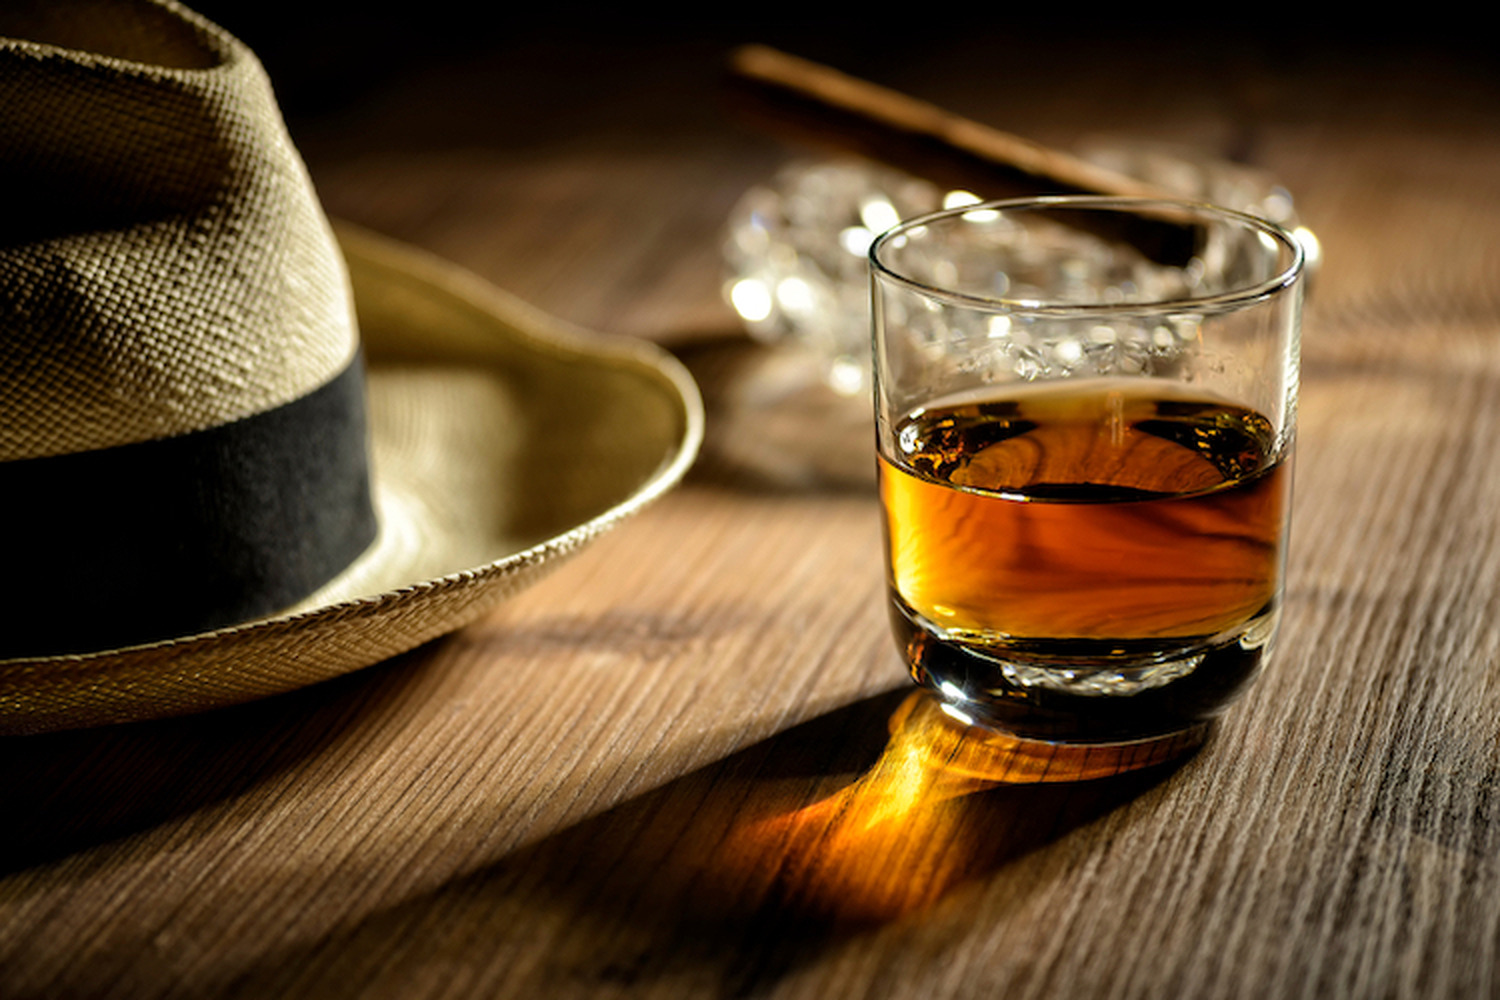 Glas,Of,Rum,,Cigar,And,A,Panama,Hat,In,A